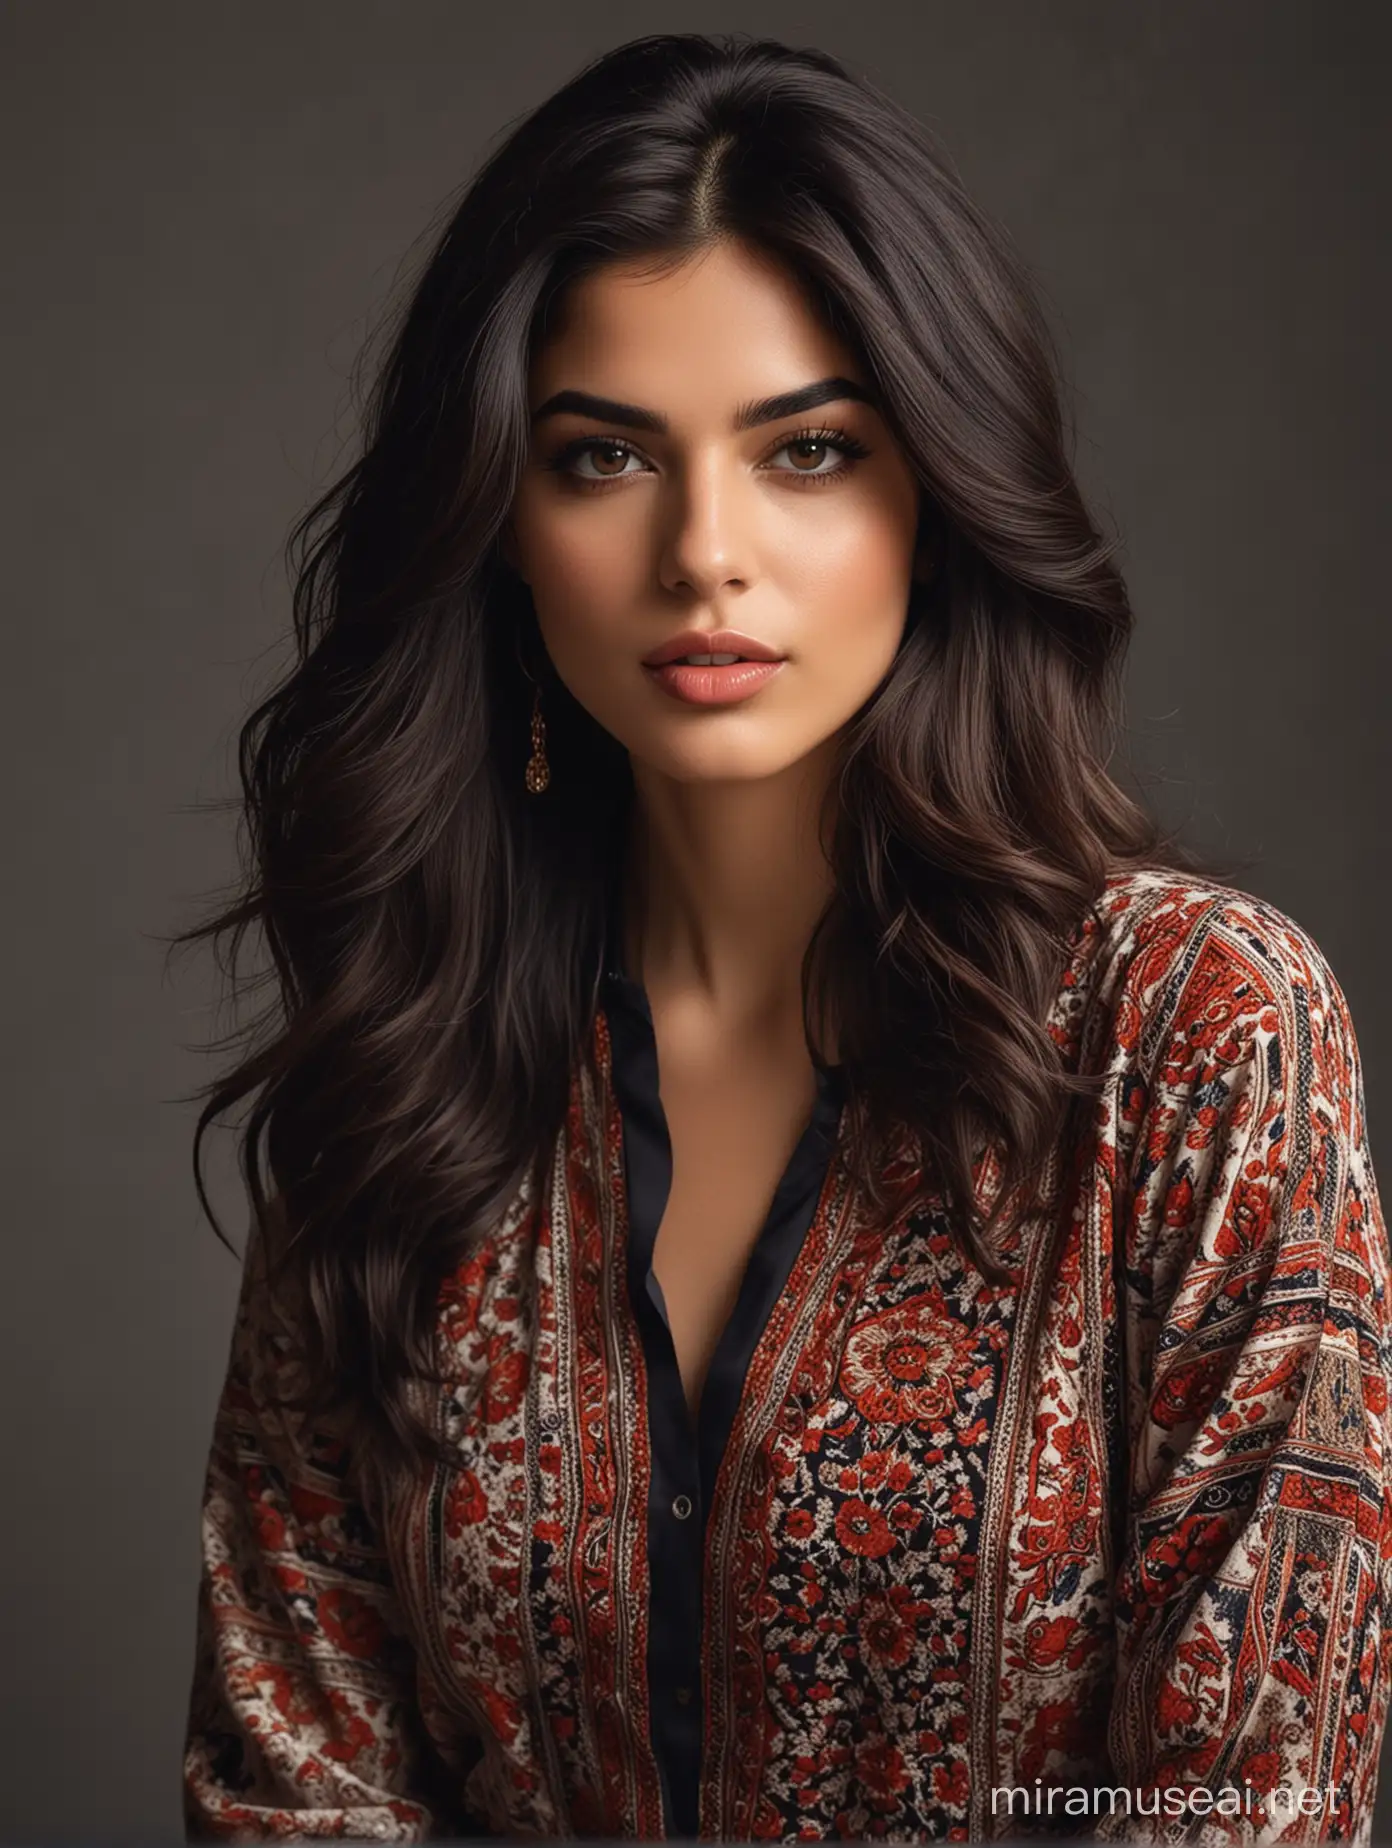 Create an ultra-realistic portrait of a modern Persian model exuding confidence and sophistication. The model has sleek, shoulder-length dark hair styled in loose waves. Their complexion is radiant, with a sun-kissed glow, and their makeup is subtle yet enhancing their features, emphasizing their expressive eyes and full lips. The model is dressed in high-fashion attire, perhaps a chic ensemble blending traditional Persian elements with contemporary flair. Think of bold patterns, luxurious fabrics, and stylish accessories. Place the model against a backdrop that reflects modern elegance, such as a sleek urban setting with architectural elements or a trendy studio space with soft, diffused lighting. Capture the model's poise and charisma, embodying the fusion of tradition and modernity that defines Persian fashion today